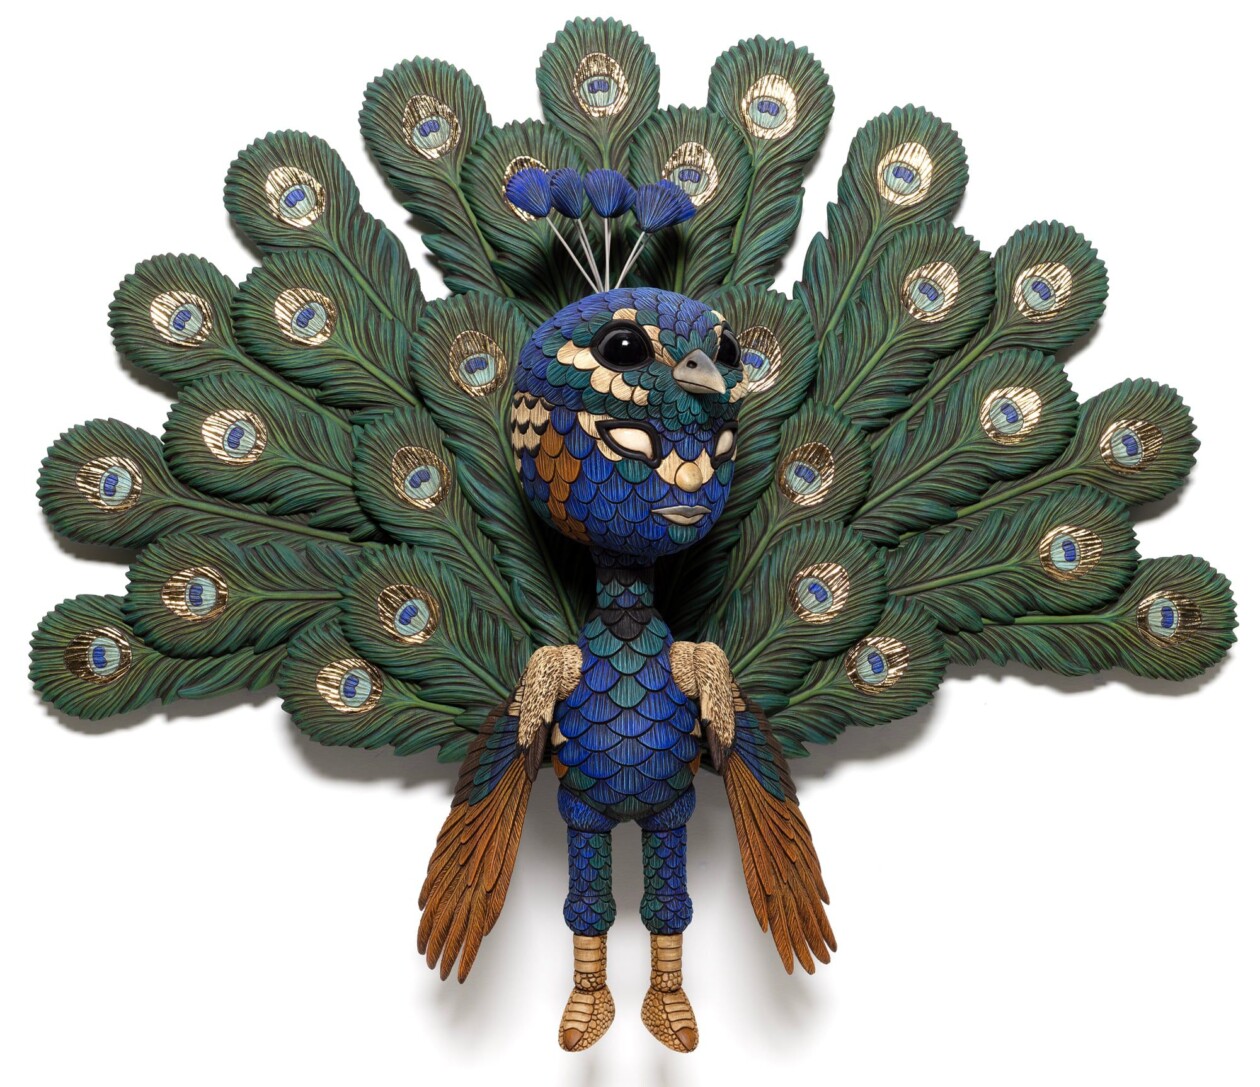 Marvelous Anthropomorphized Bird Sculptures By Calvin Ma (16)